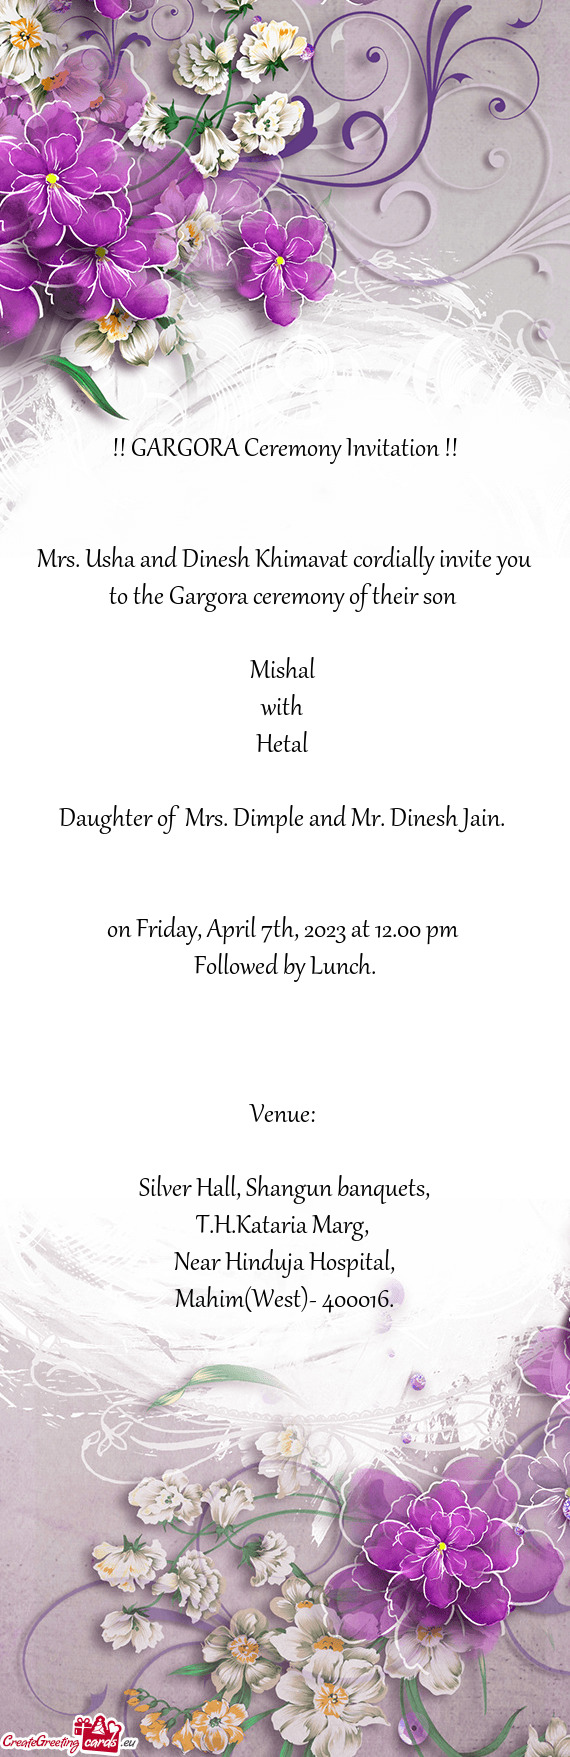 Daughter of Mrs. Dimple and Mr. Dinesh Jain